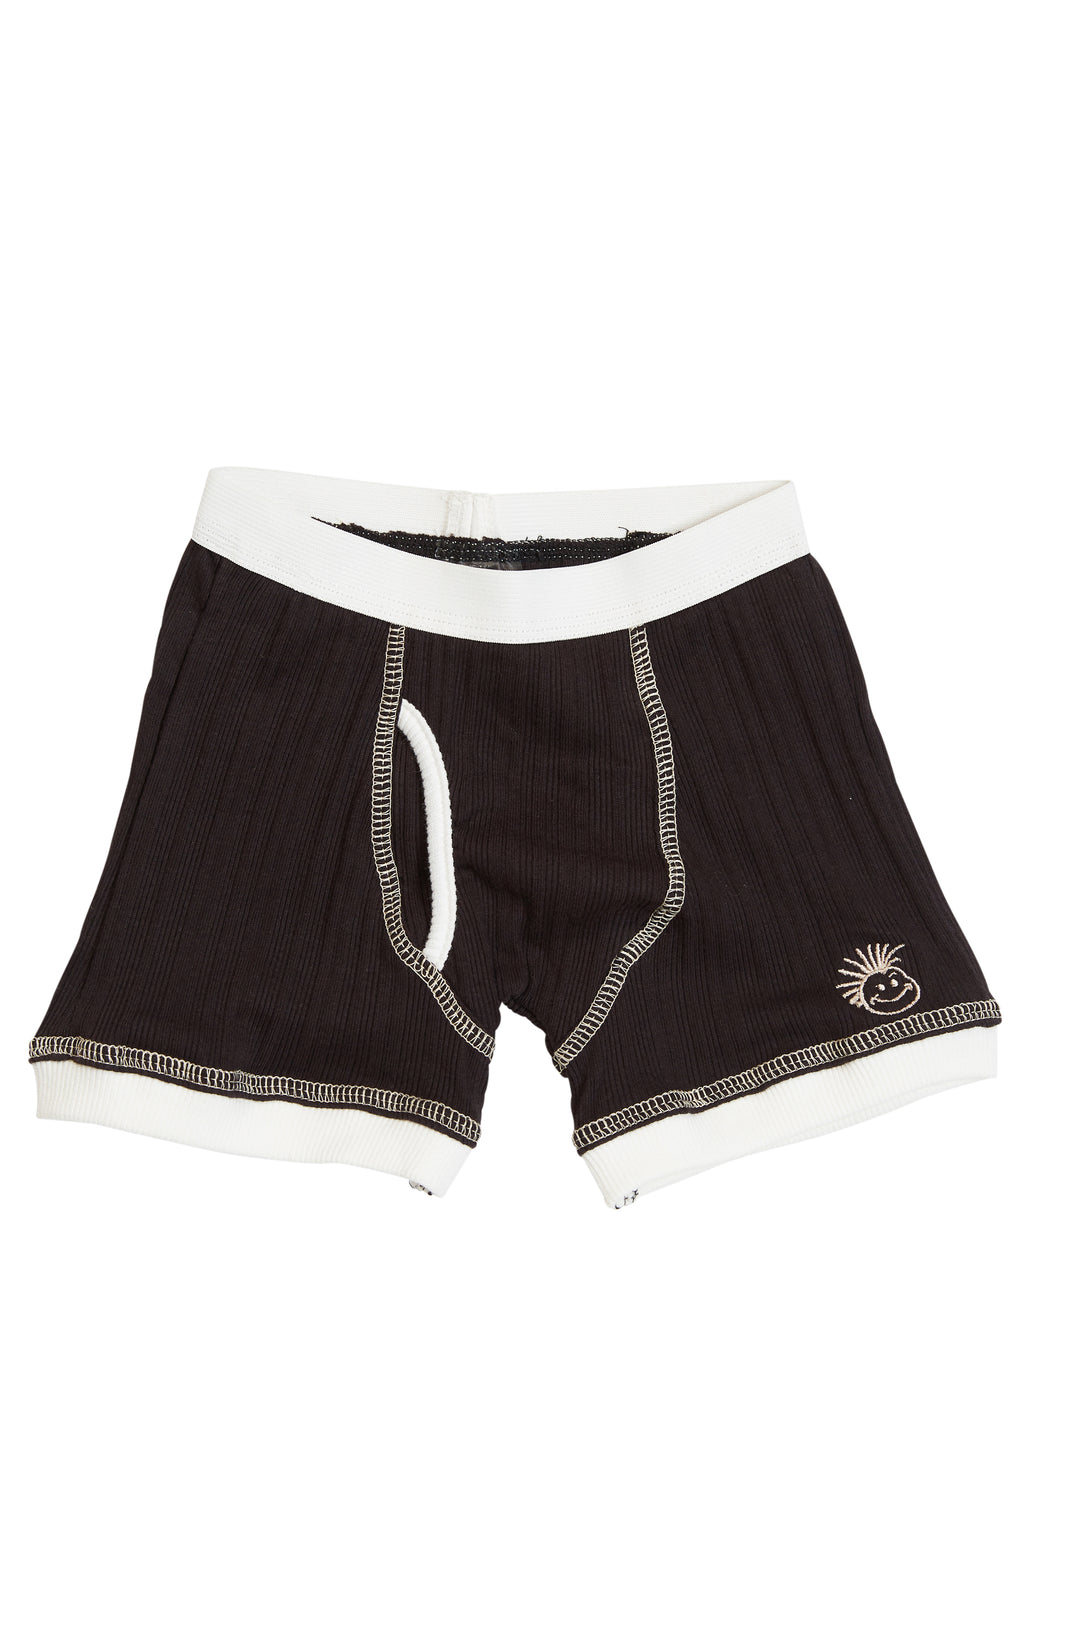 An image of Knuckleheads Logo Black Skivvies for Kids, showcasing stylish black underwear with the iconic Knuckleheads logo. These comfortable and trendy undergarments are perfect for children, combining fashion and comfort seamlessly.